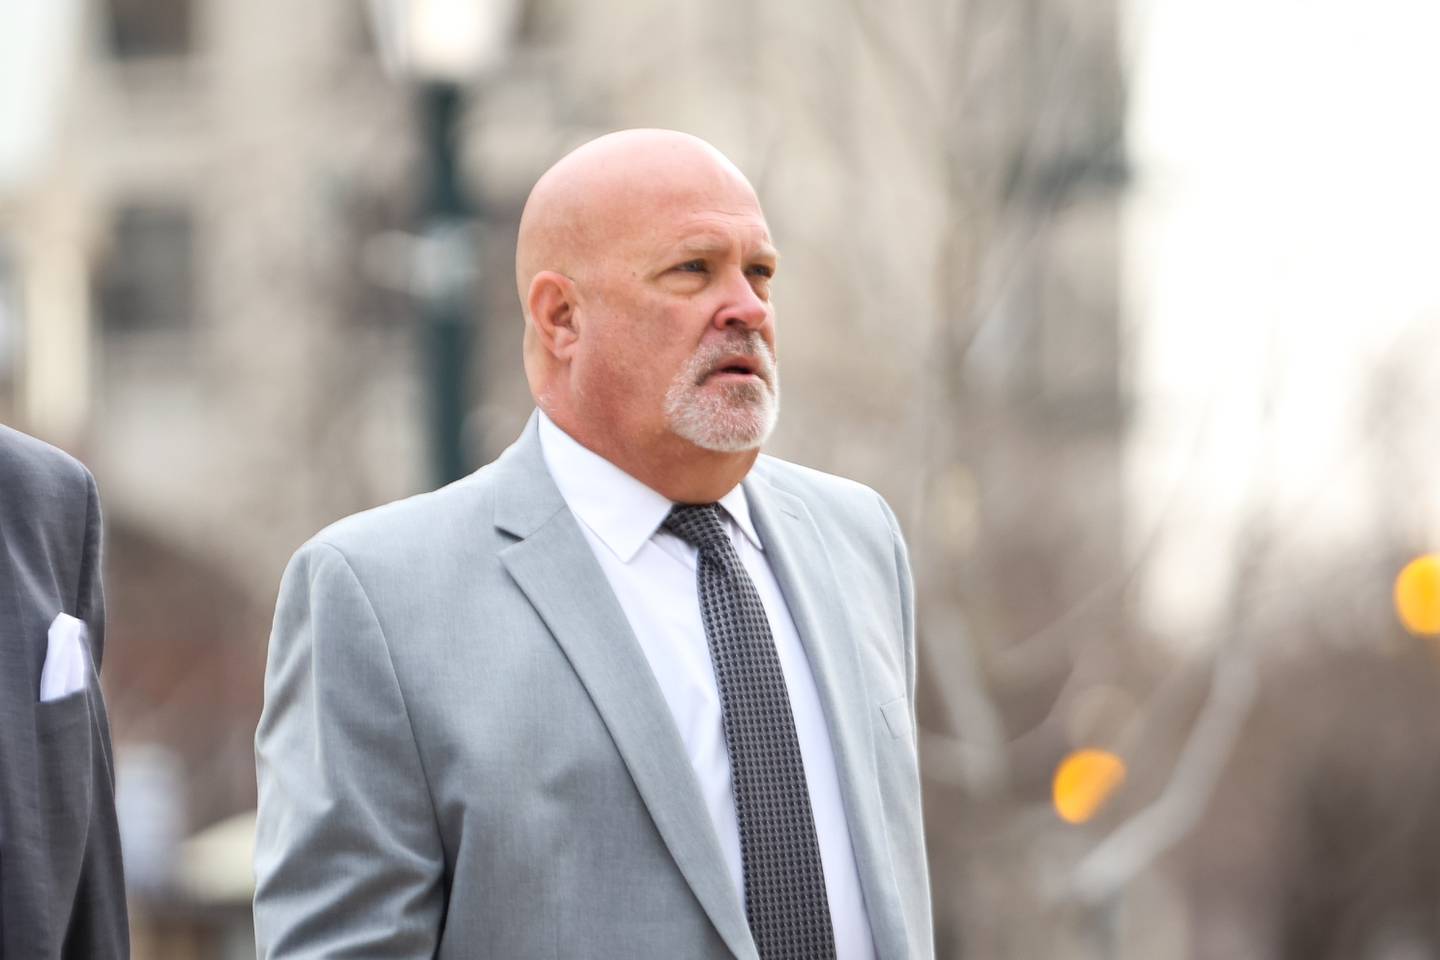 Don “Duck” Dickinson arrives to the Will County Courthouse with his lawyer Frank Andreano. The former Joliet councilman is charge with false accusation against the Joliet Mayor. Monday, April 11, 2022, in Joliet.